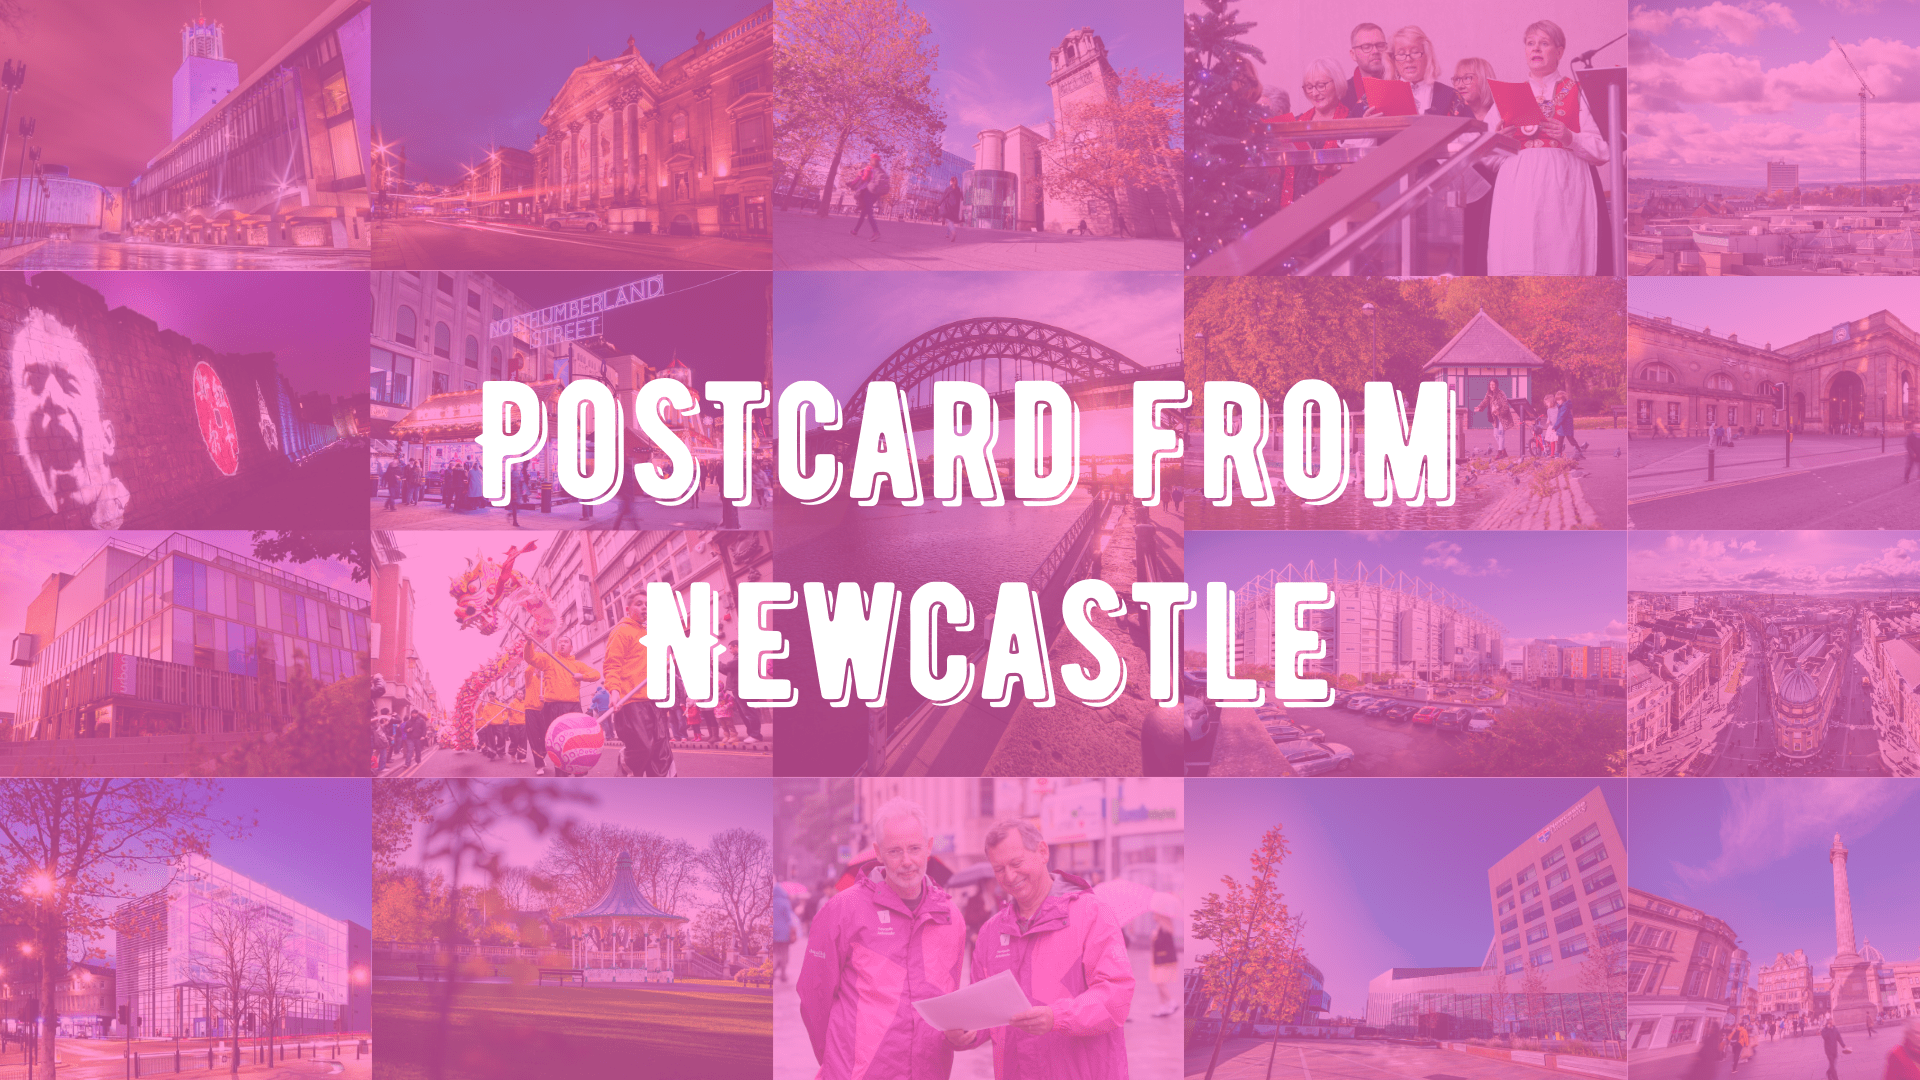 Images of Newcastle, coloured pink, with the text Postcard from Newcastle